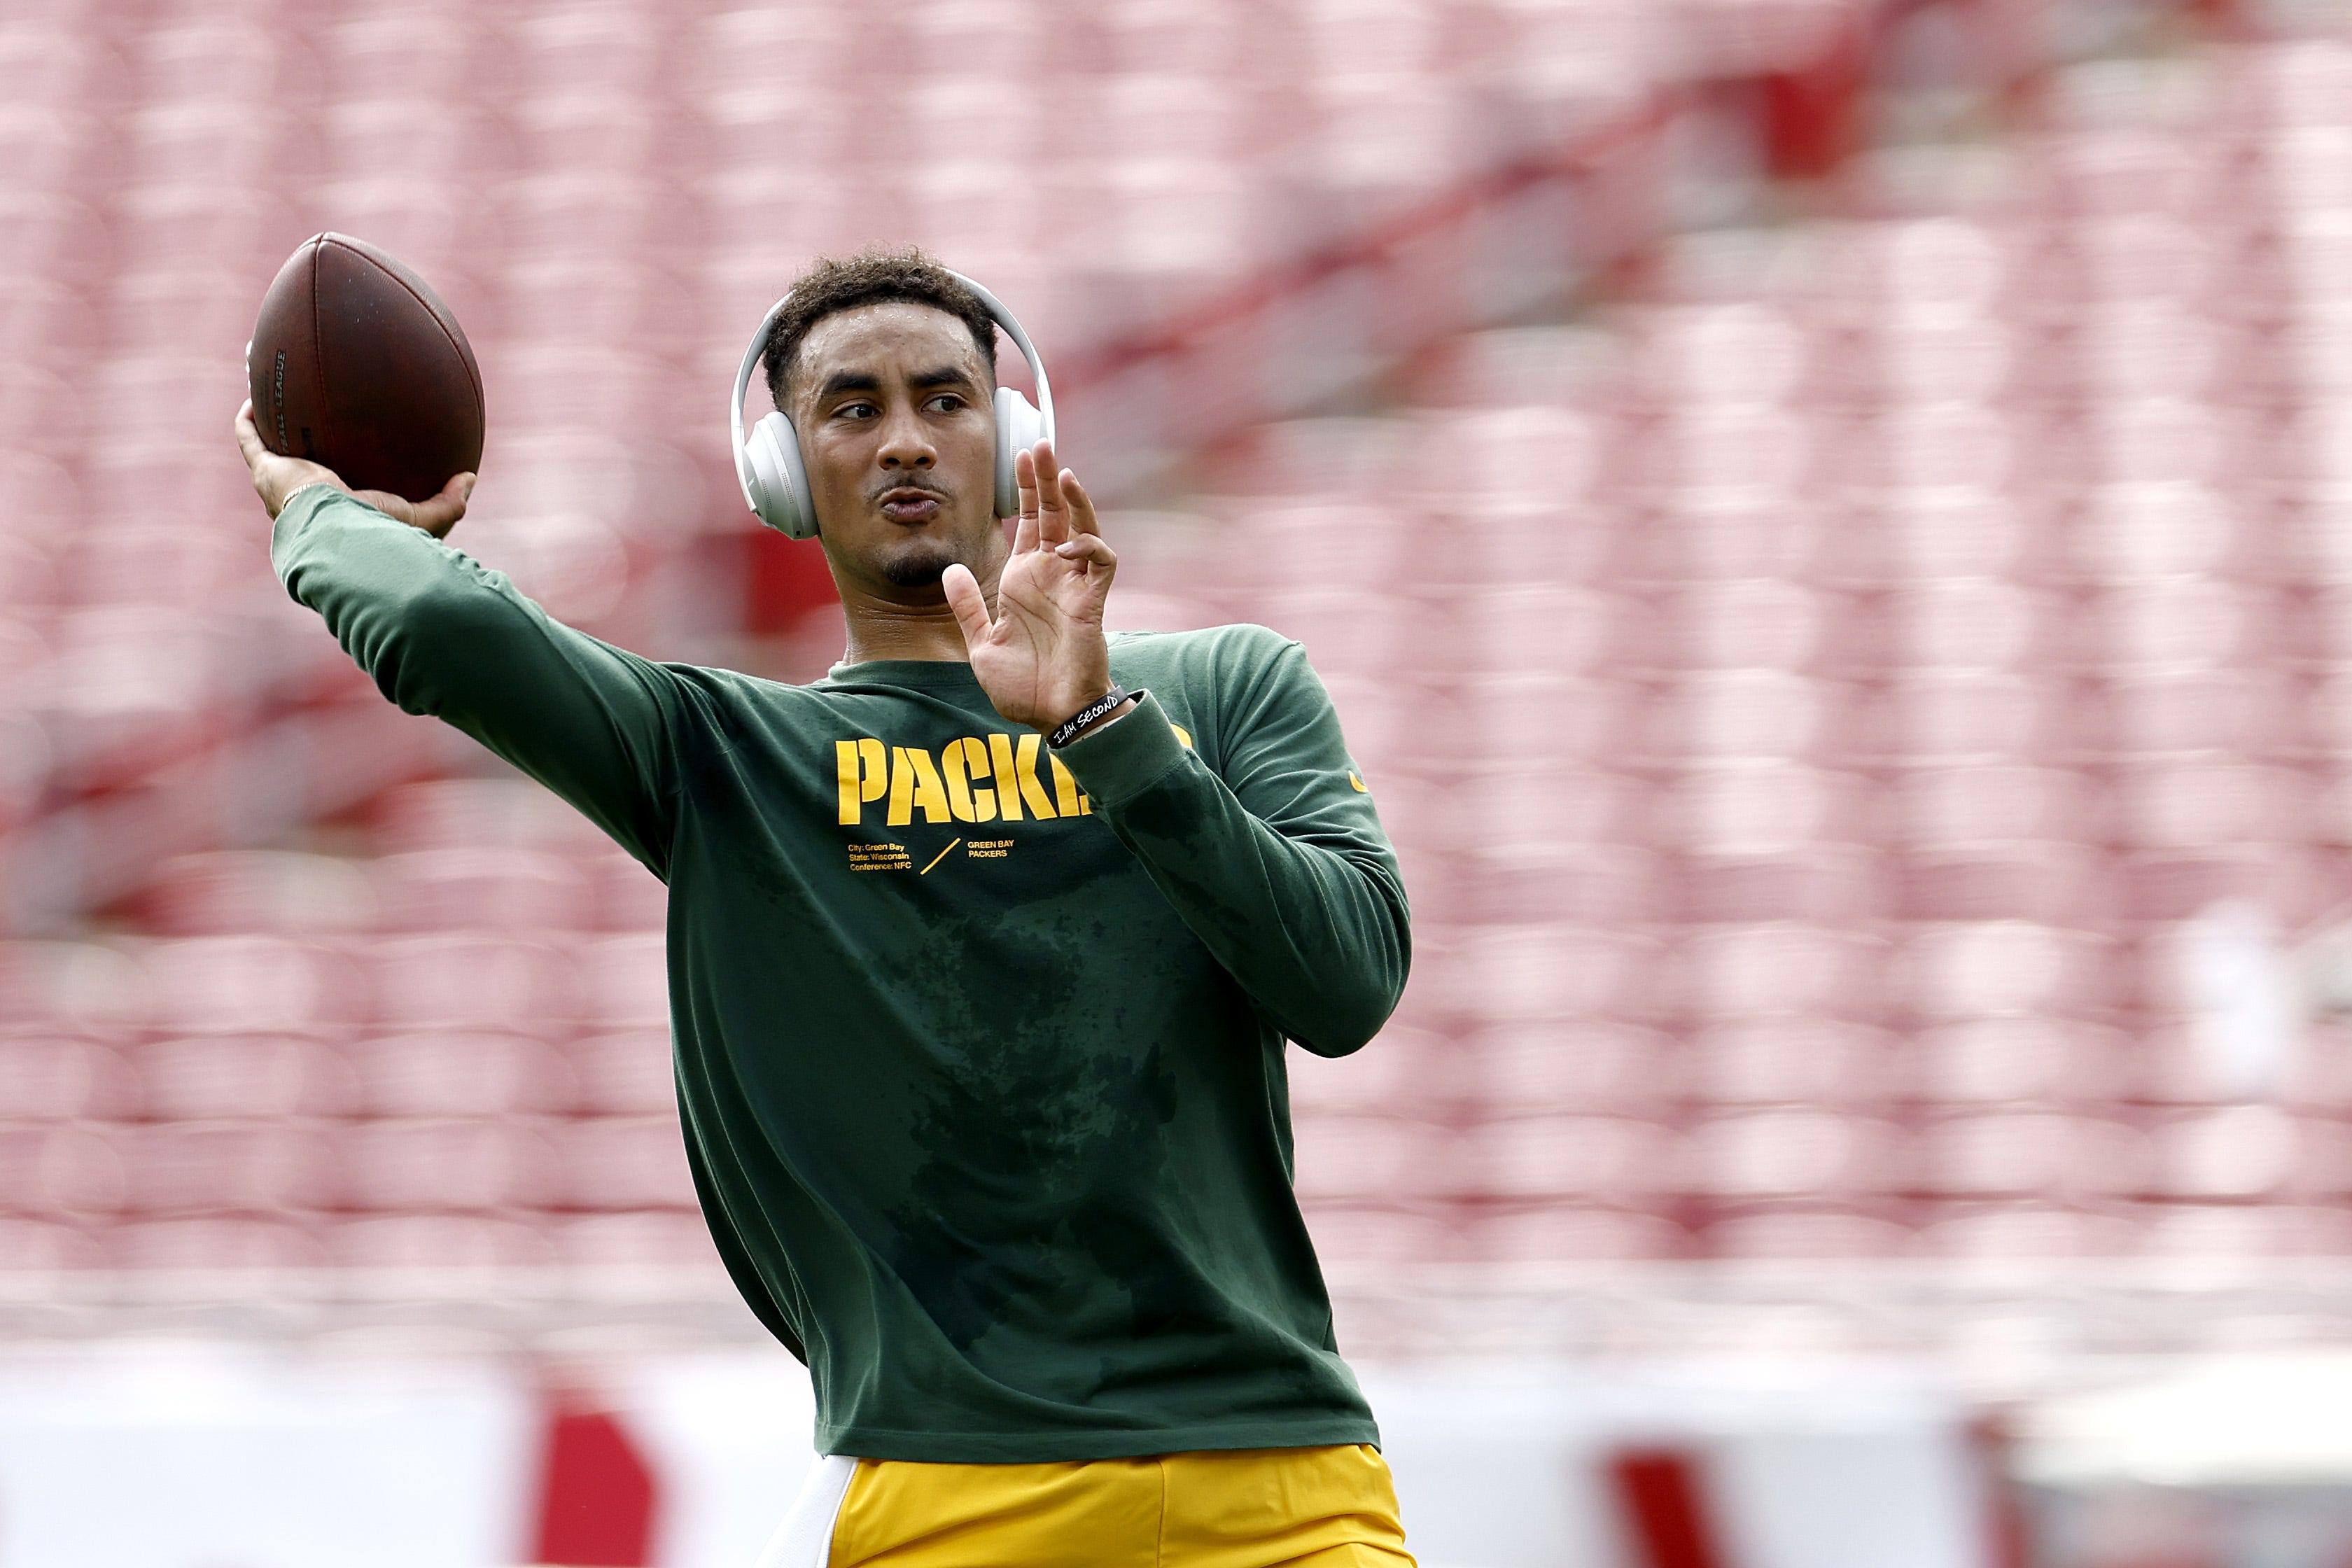 Packers backup quarterback Jordan Love warms up prior to the game against the Tampa Bay Buccaneers on Sept. 25, 2022, at Raymond James Stadium in Tampa, Florida.